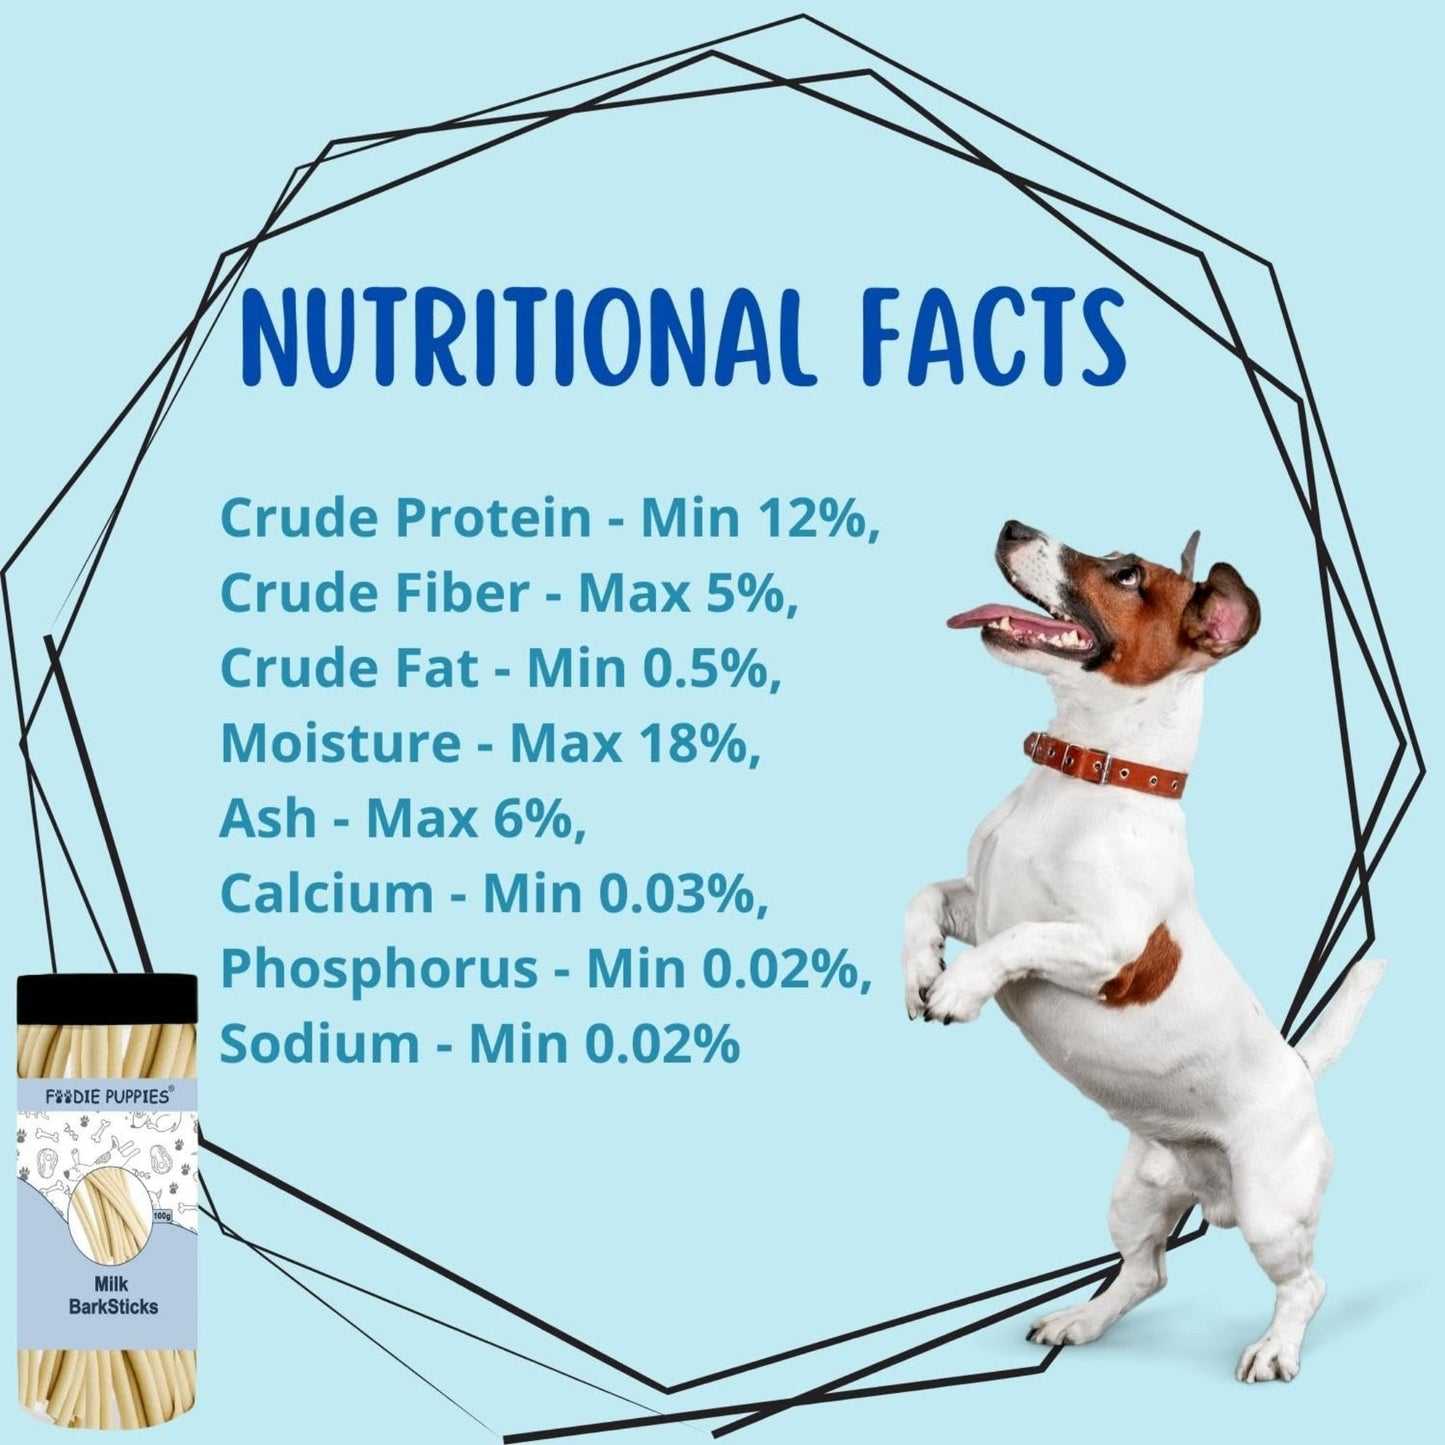 Foodie Puppies Barksticks Milk Sticks Treat for Dogs - 100g, Pack of 2